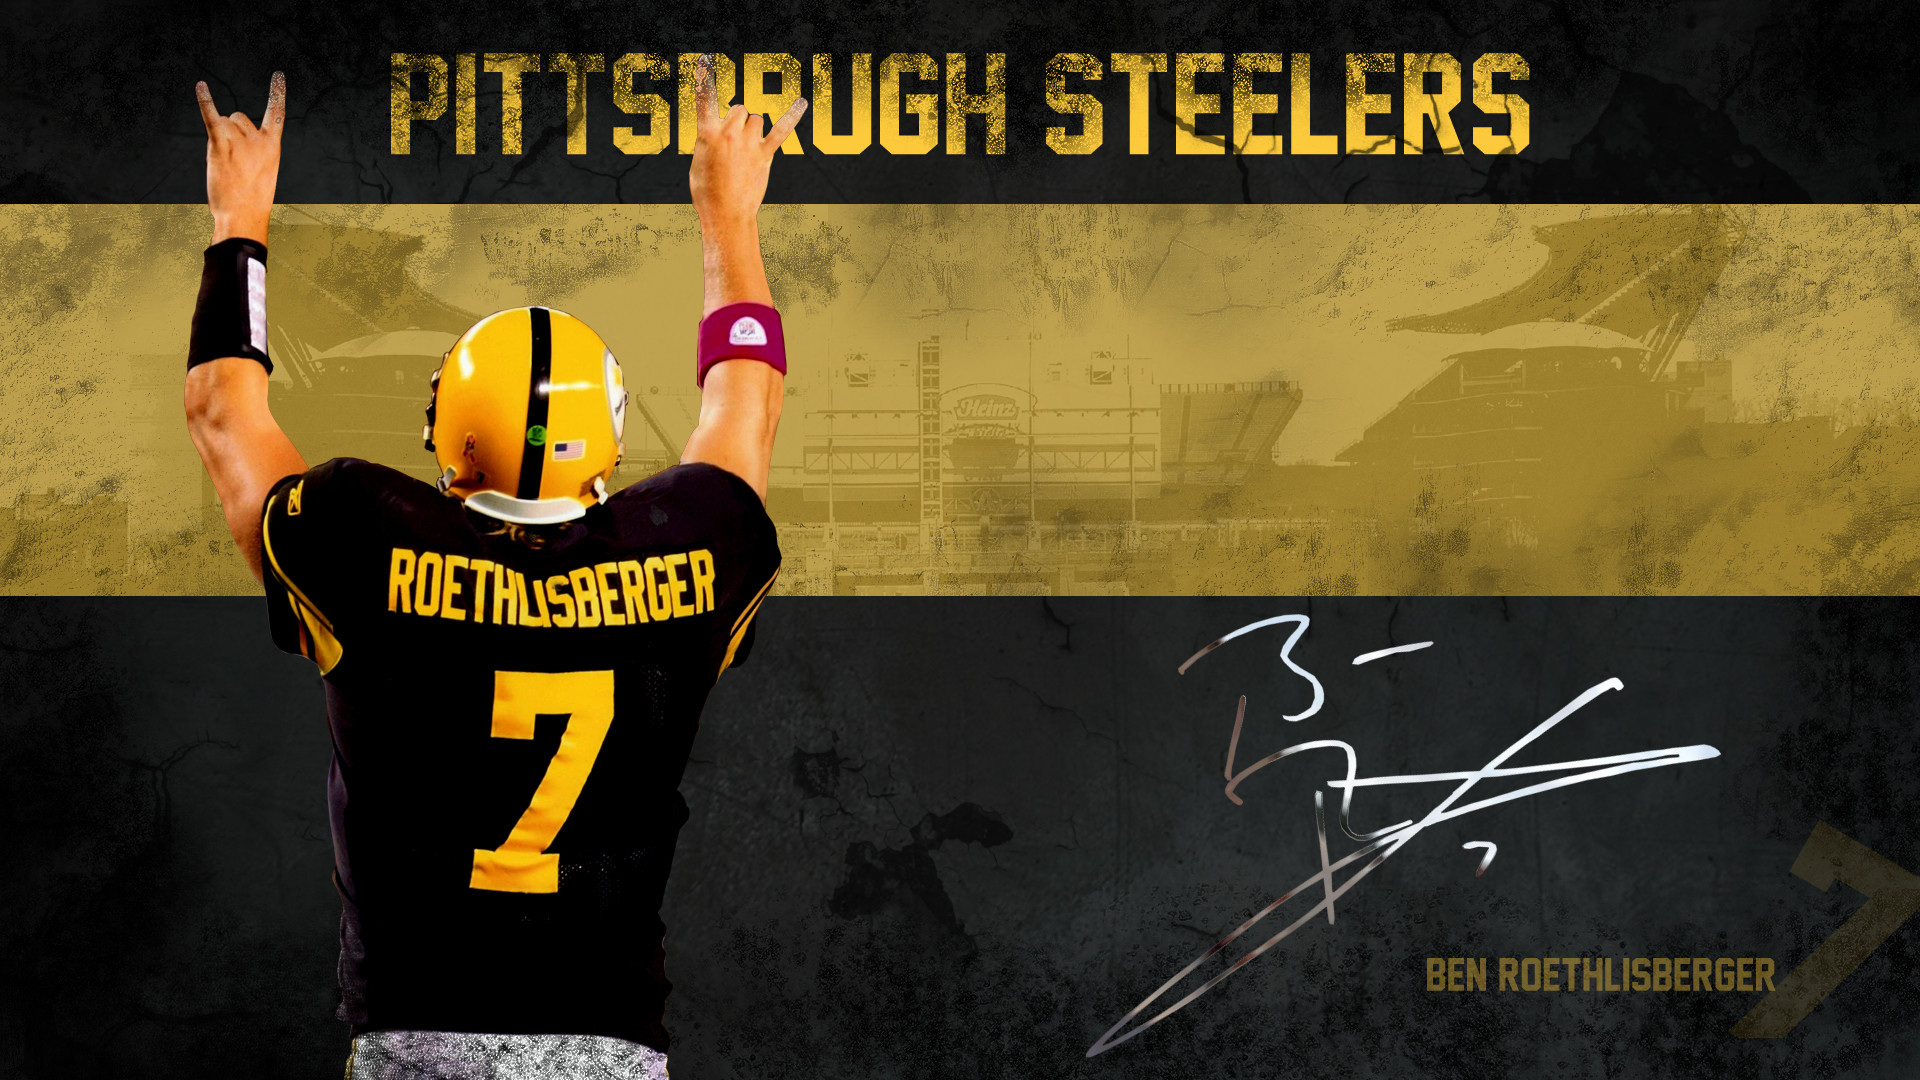 1920x1080 New Pittsburgh Steelers wallpaper background Pittsburgh Steelers 